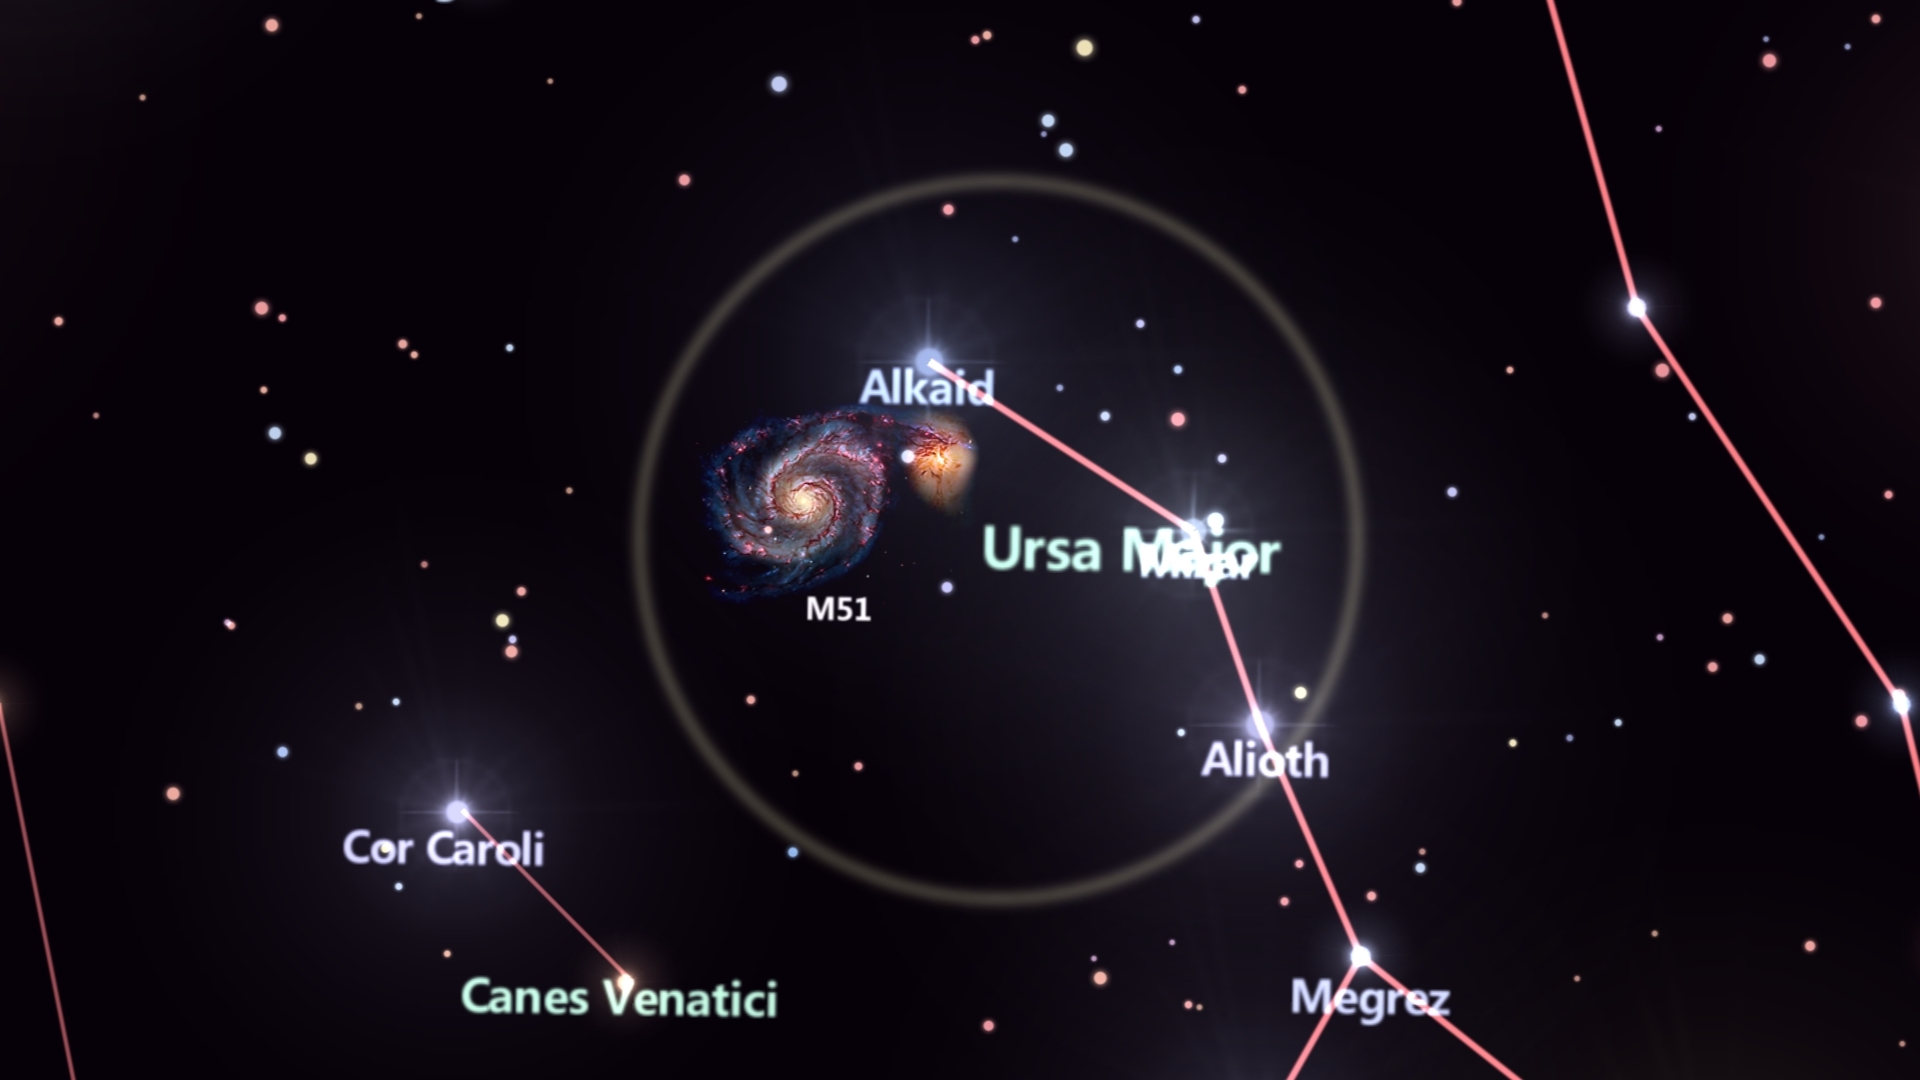 Position of HD84406 star at the constellation of Ursa Major